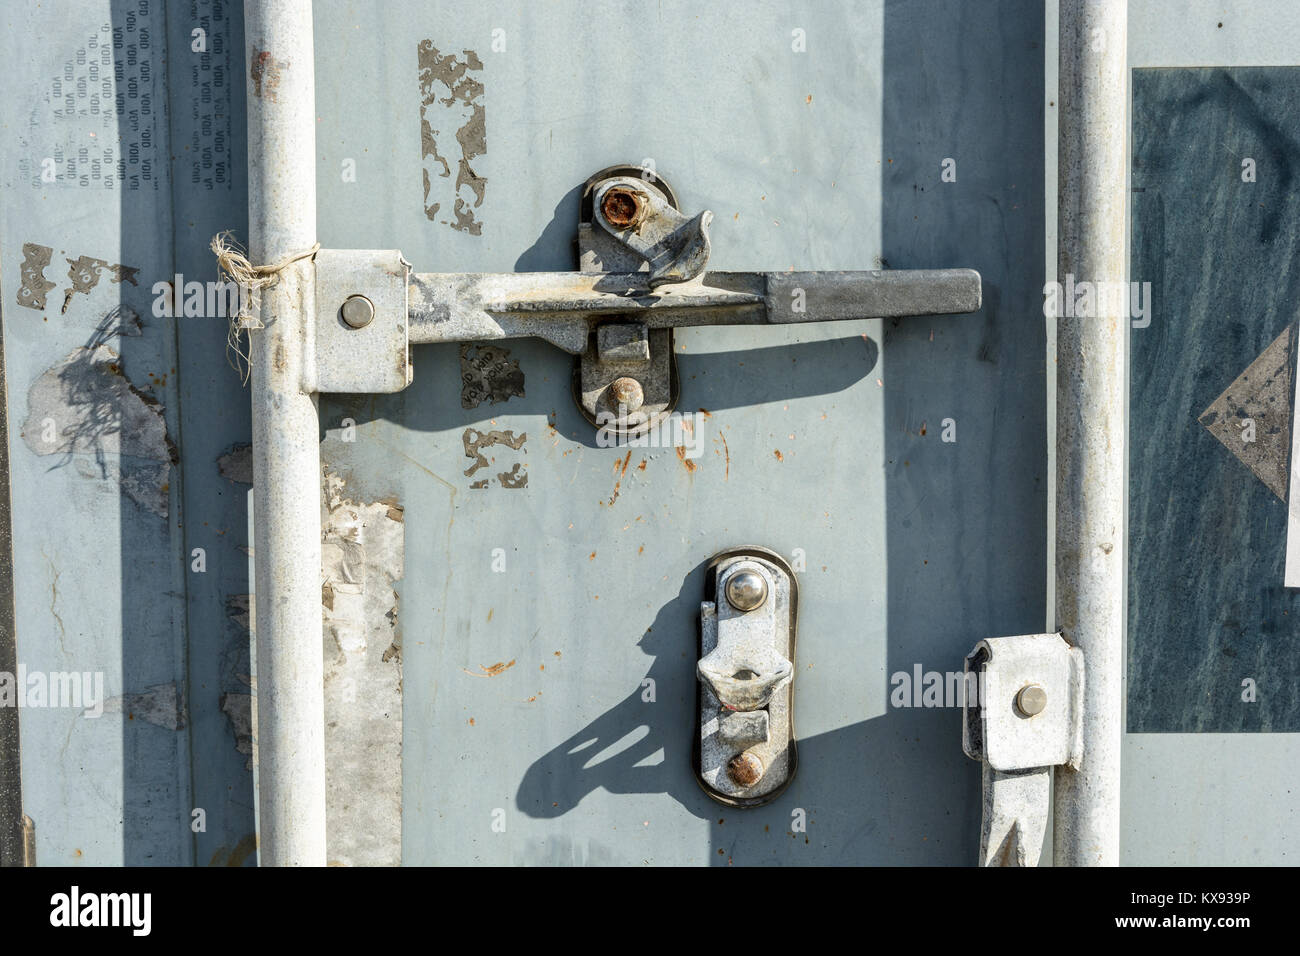 Closeup view of the worn door handle lock of an intermodal shipping container. Stock Photo